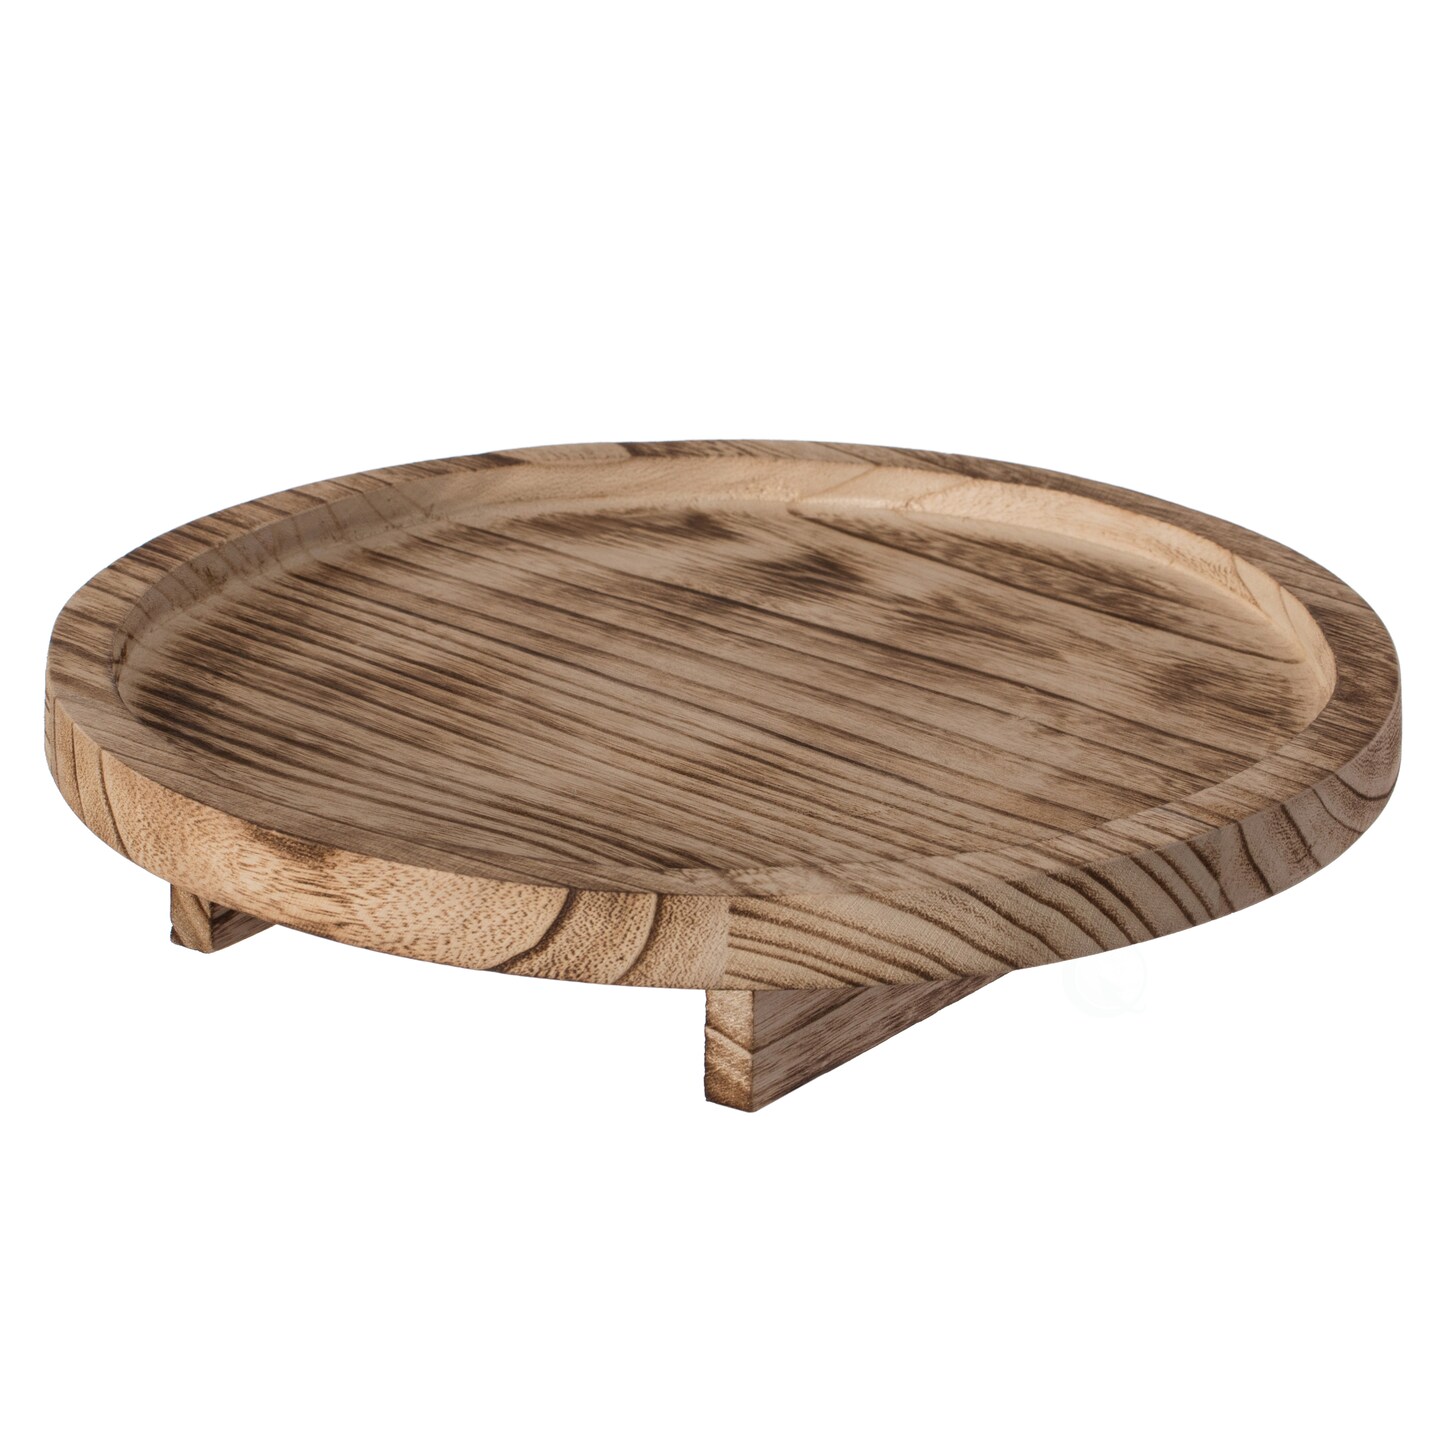 Natural Wooden Round Dish Ornament Slice Tray Table Charger with Height